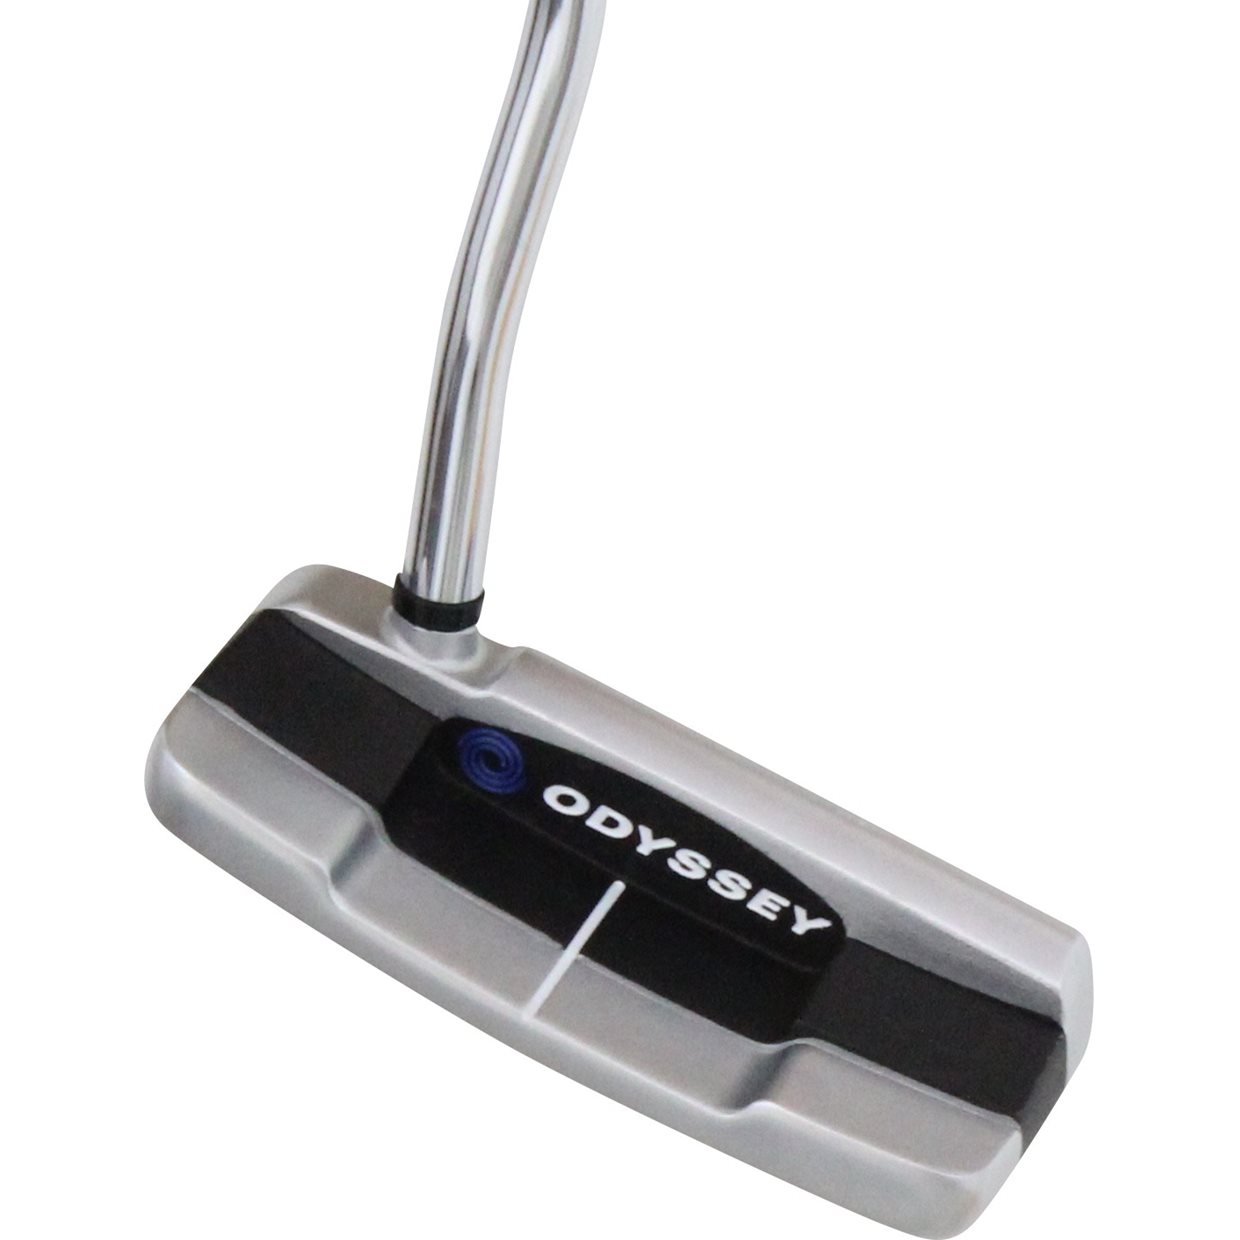 odyssey works versa 1 putter review